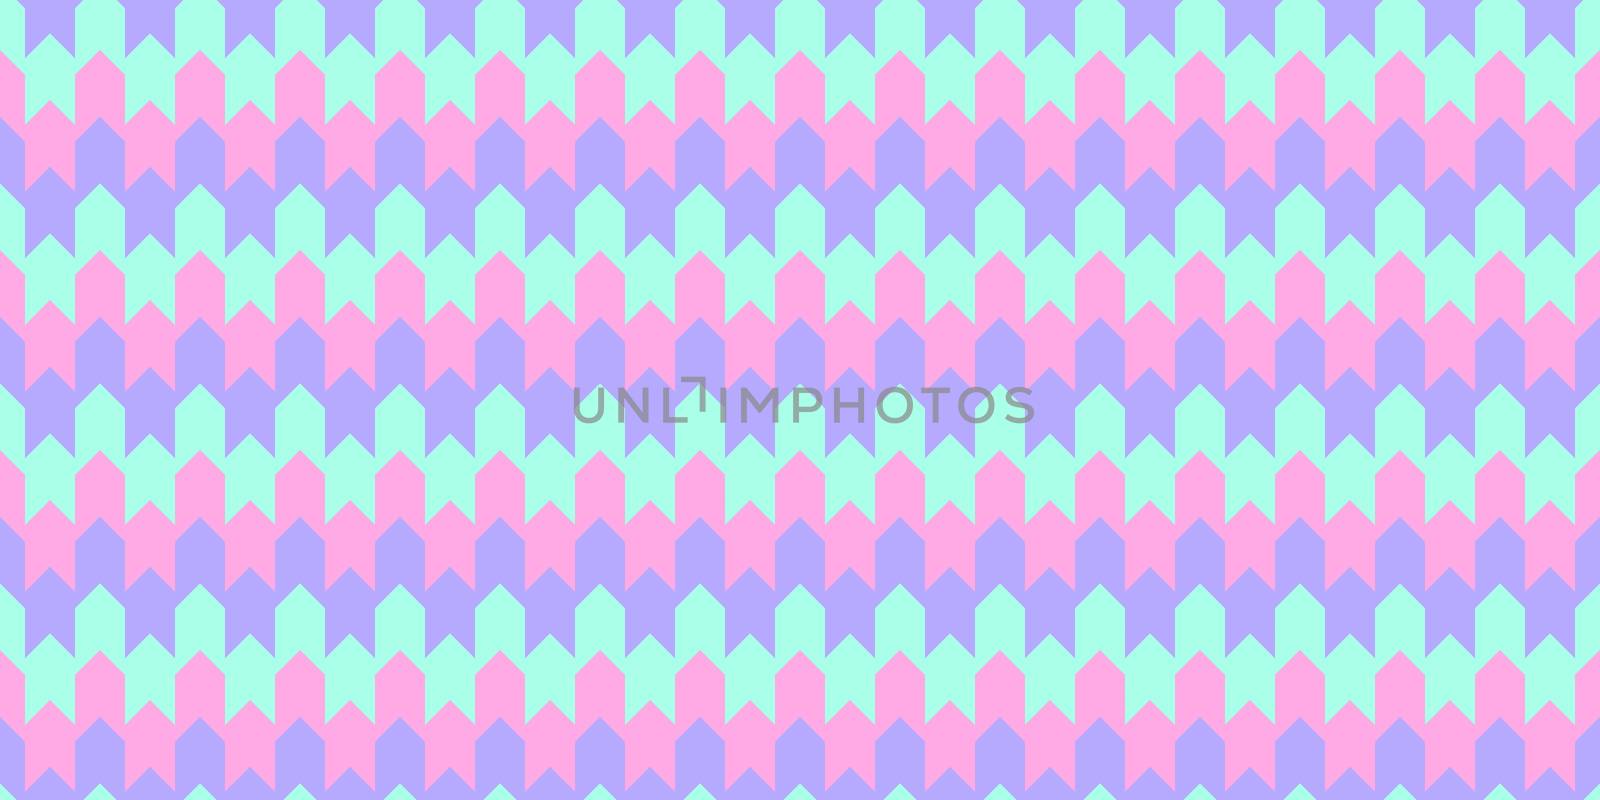 Chevron Geometry Background. Seamless Zigzag Texture. Modern Striped Pattern. by sanches812